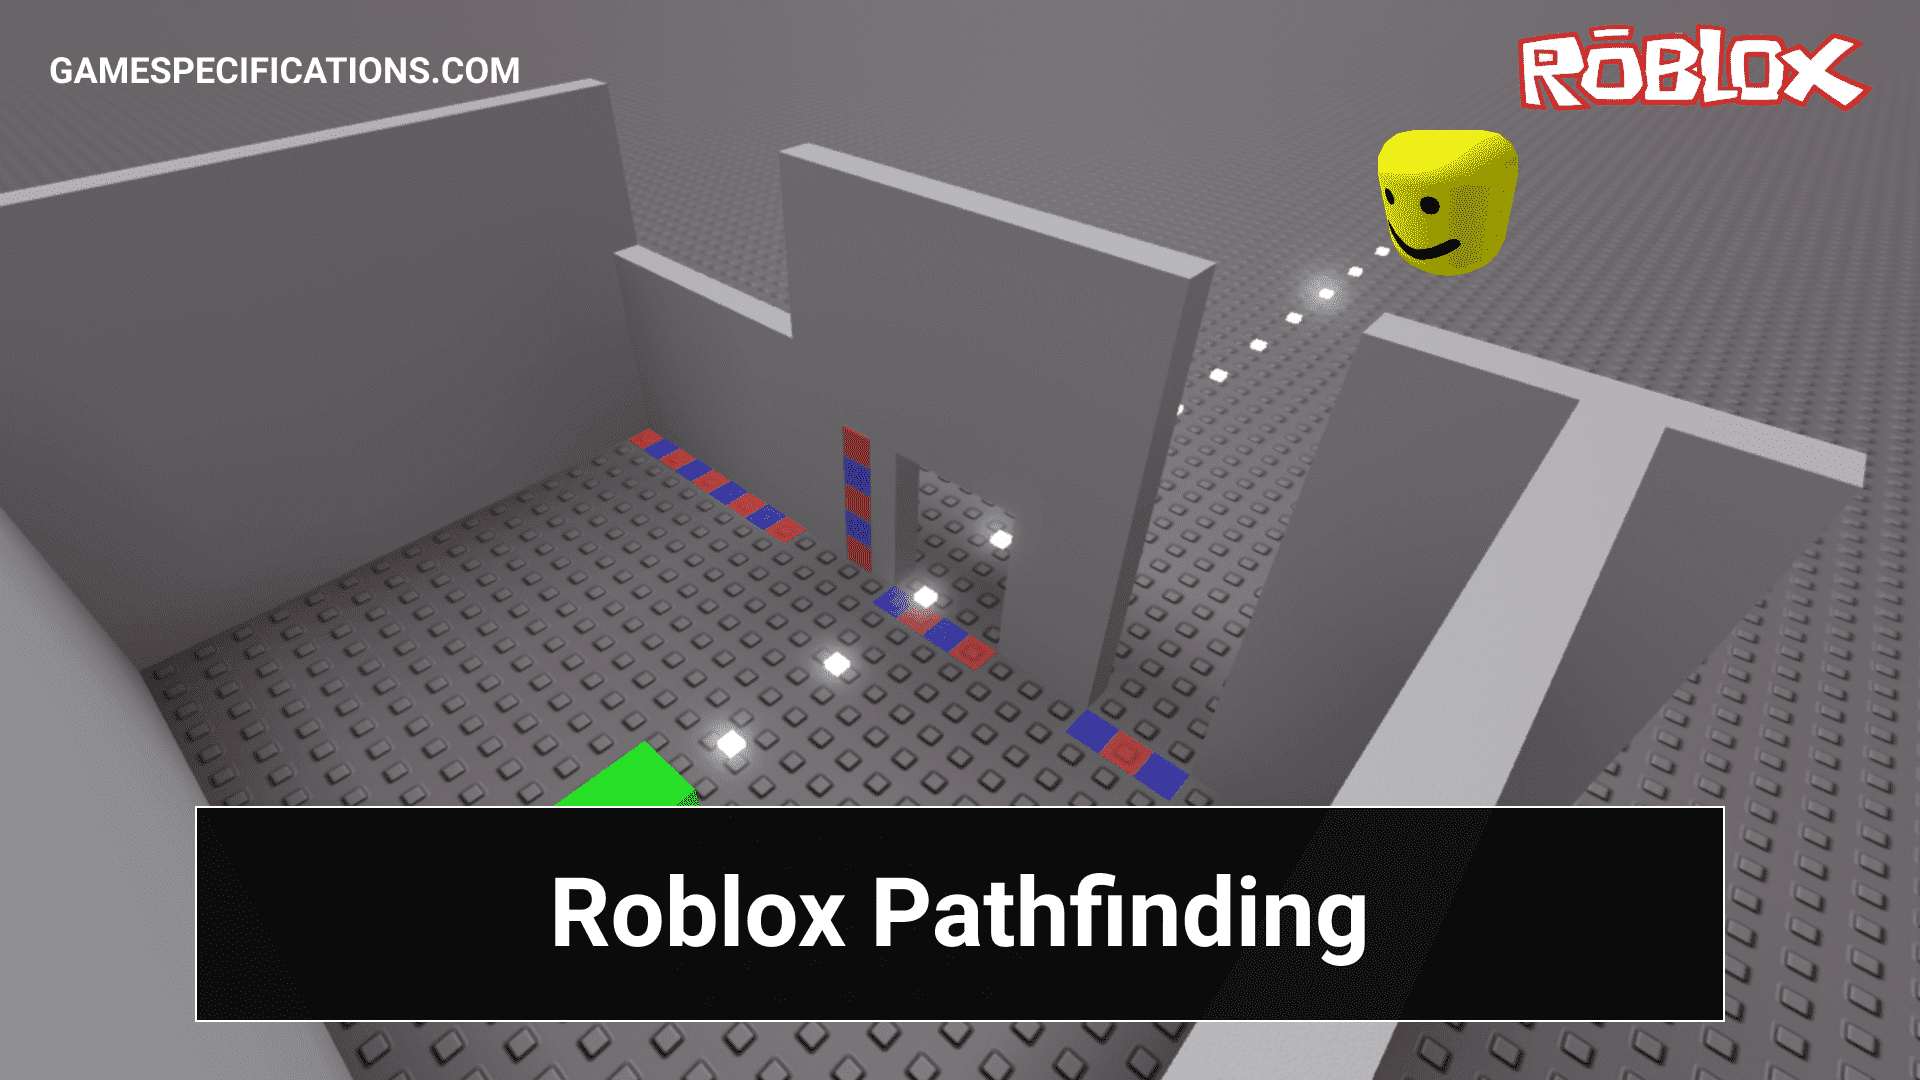 Roblox Pathfinding How To Find The Smallest And Smartest Path In Roblox Game Specifications - roblox pathfinding npc